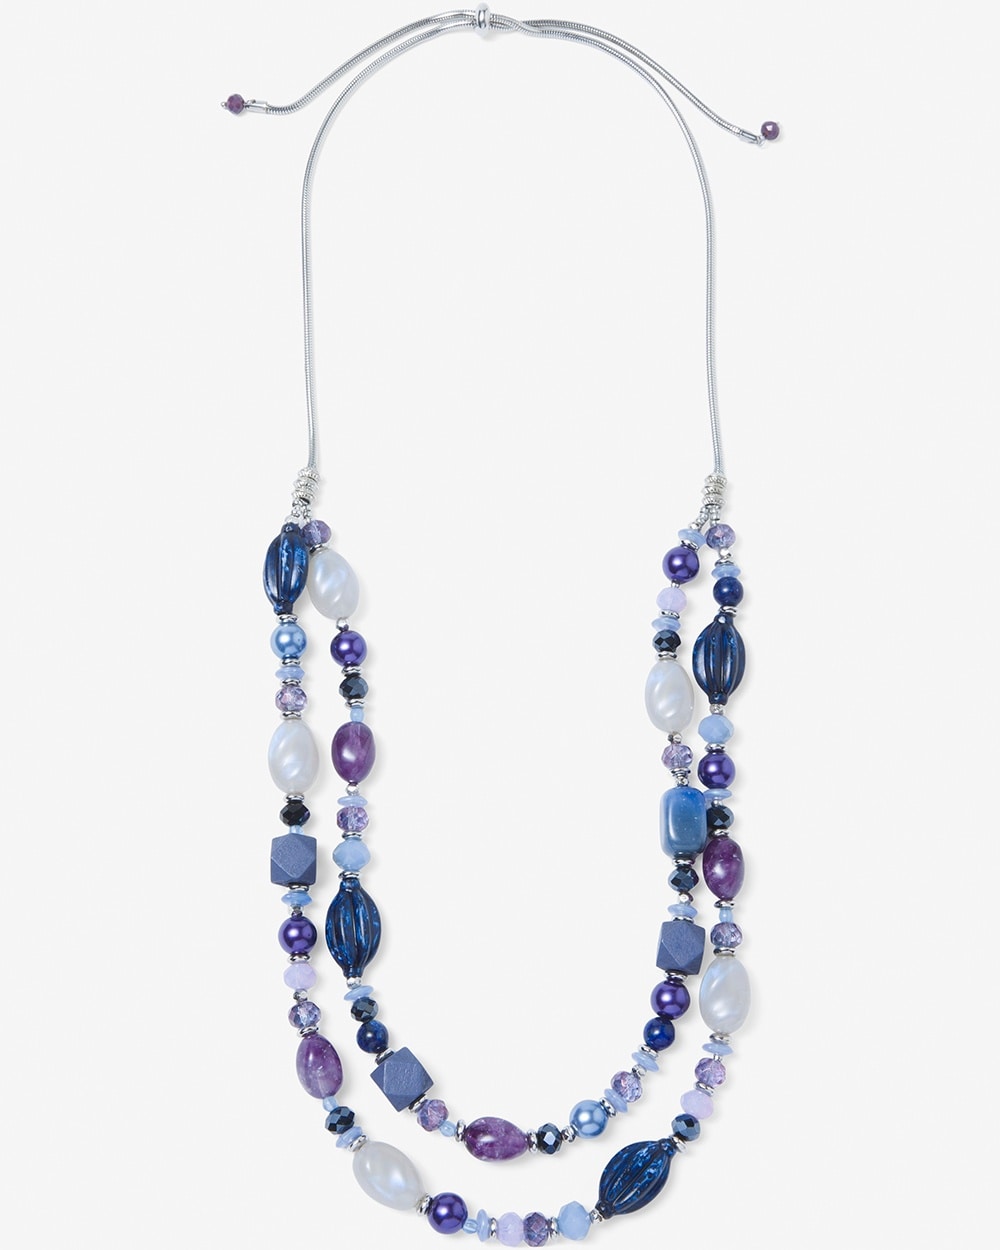 Blue-Beaded Adjustable Necklace